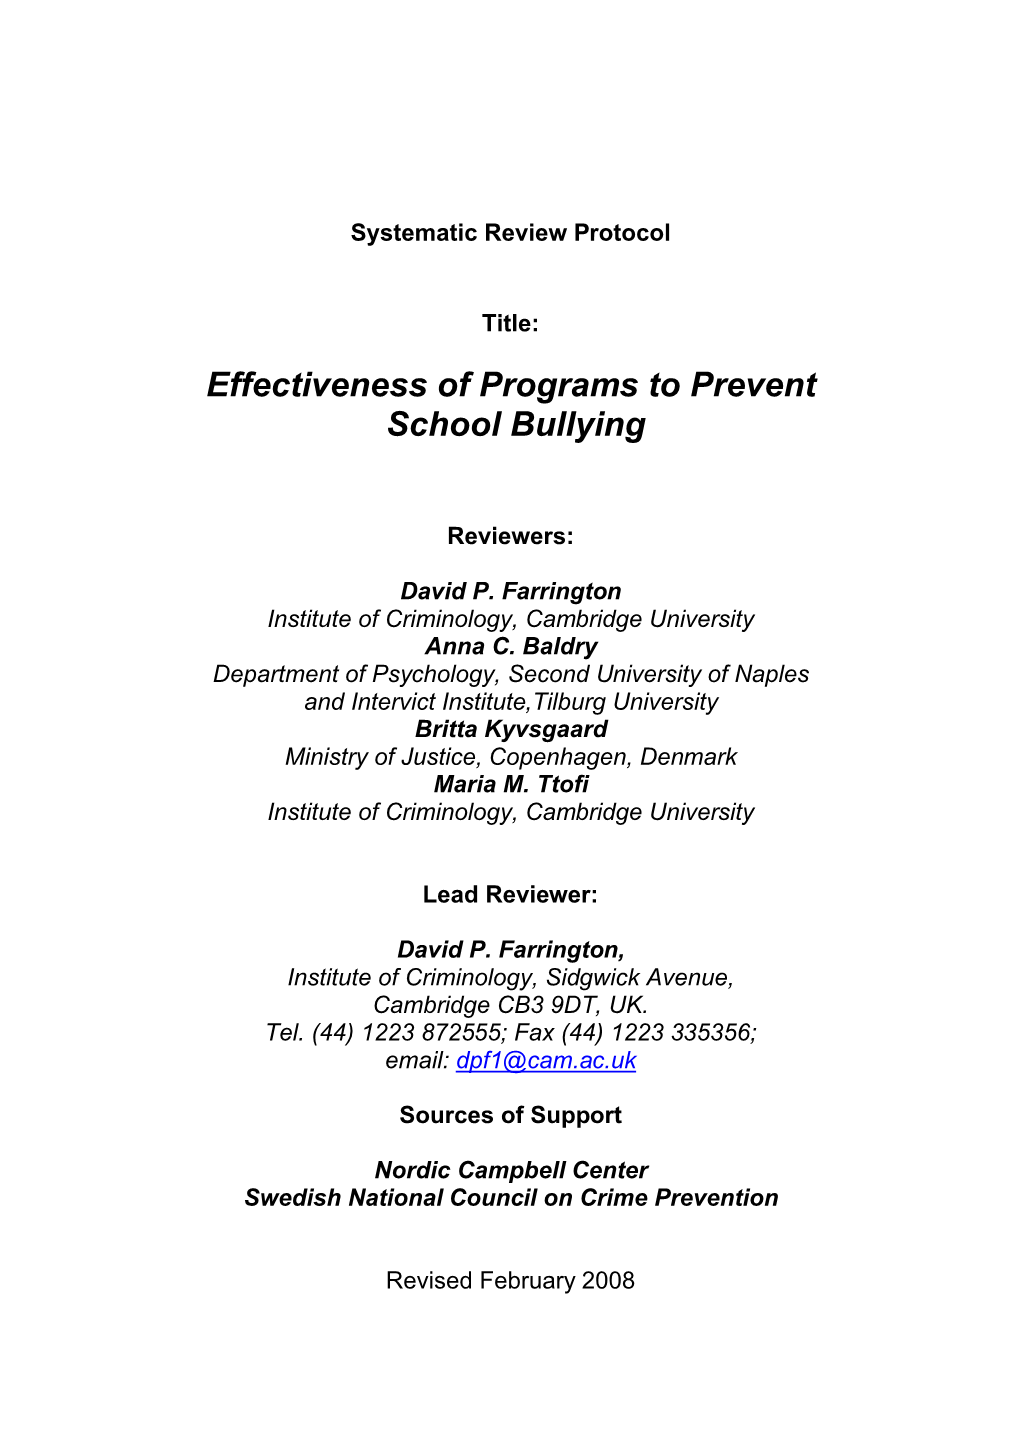 Effectiveness of Programs to Prevent School Bullying